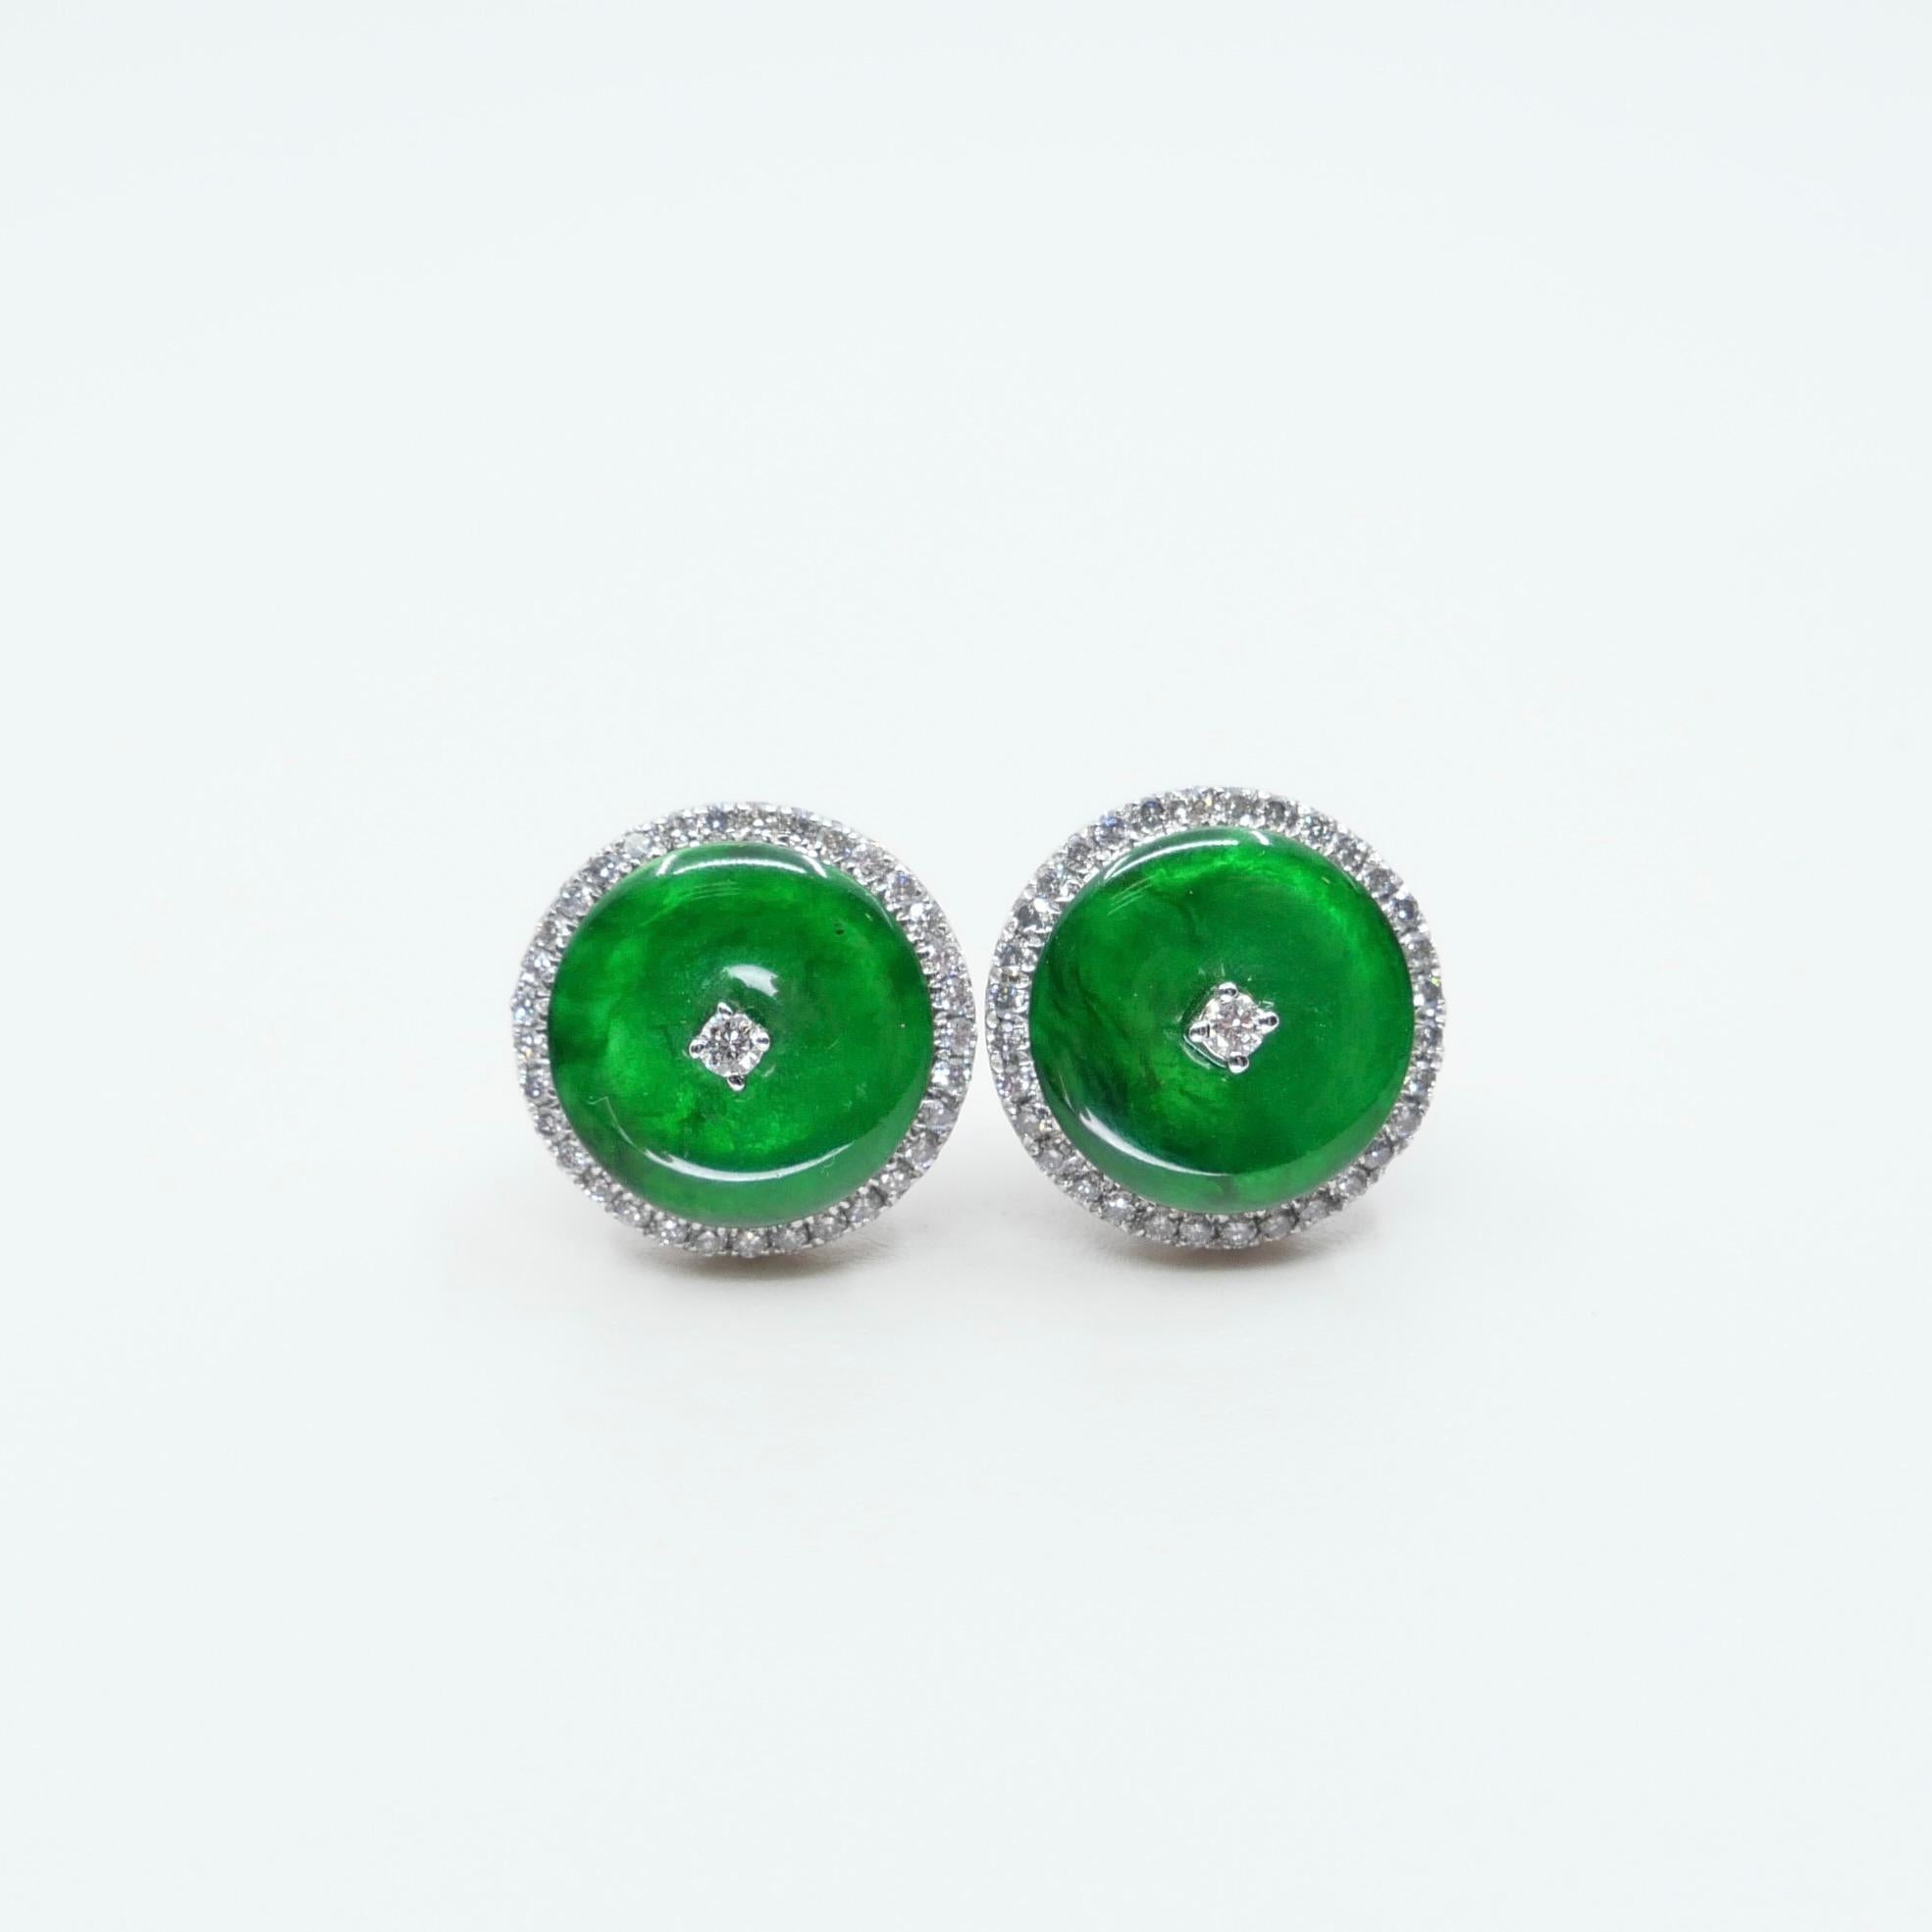 Certified Natural Type A Jadeite Jade And Diamond Earrings. Apple Green Color 13